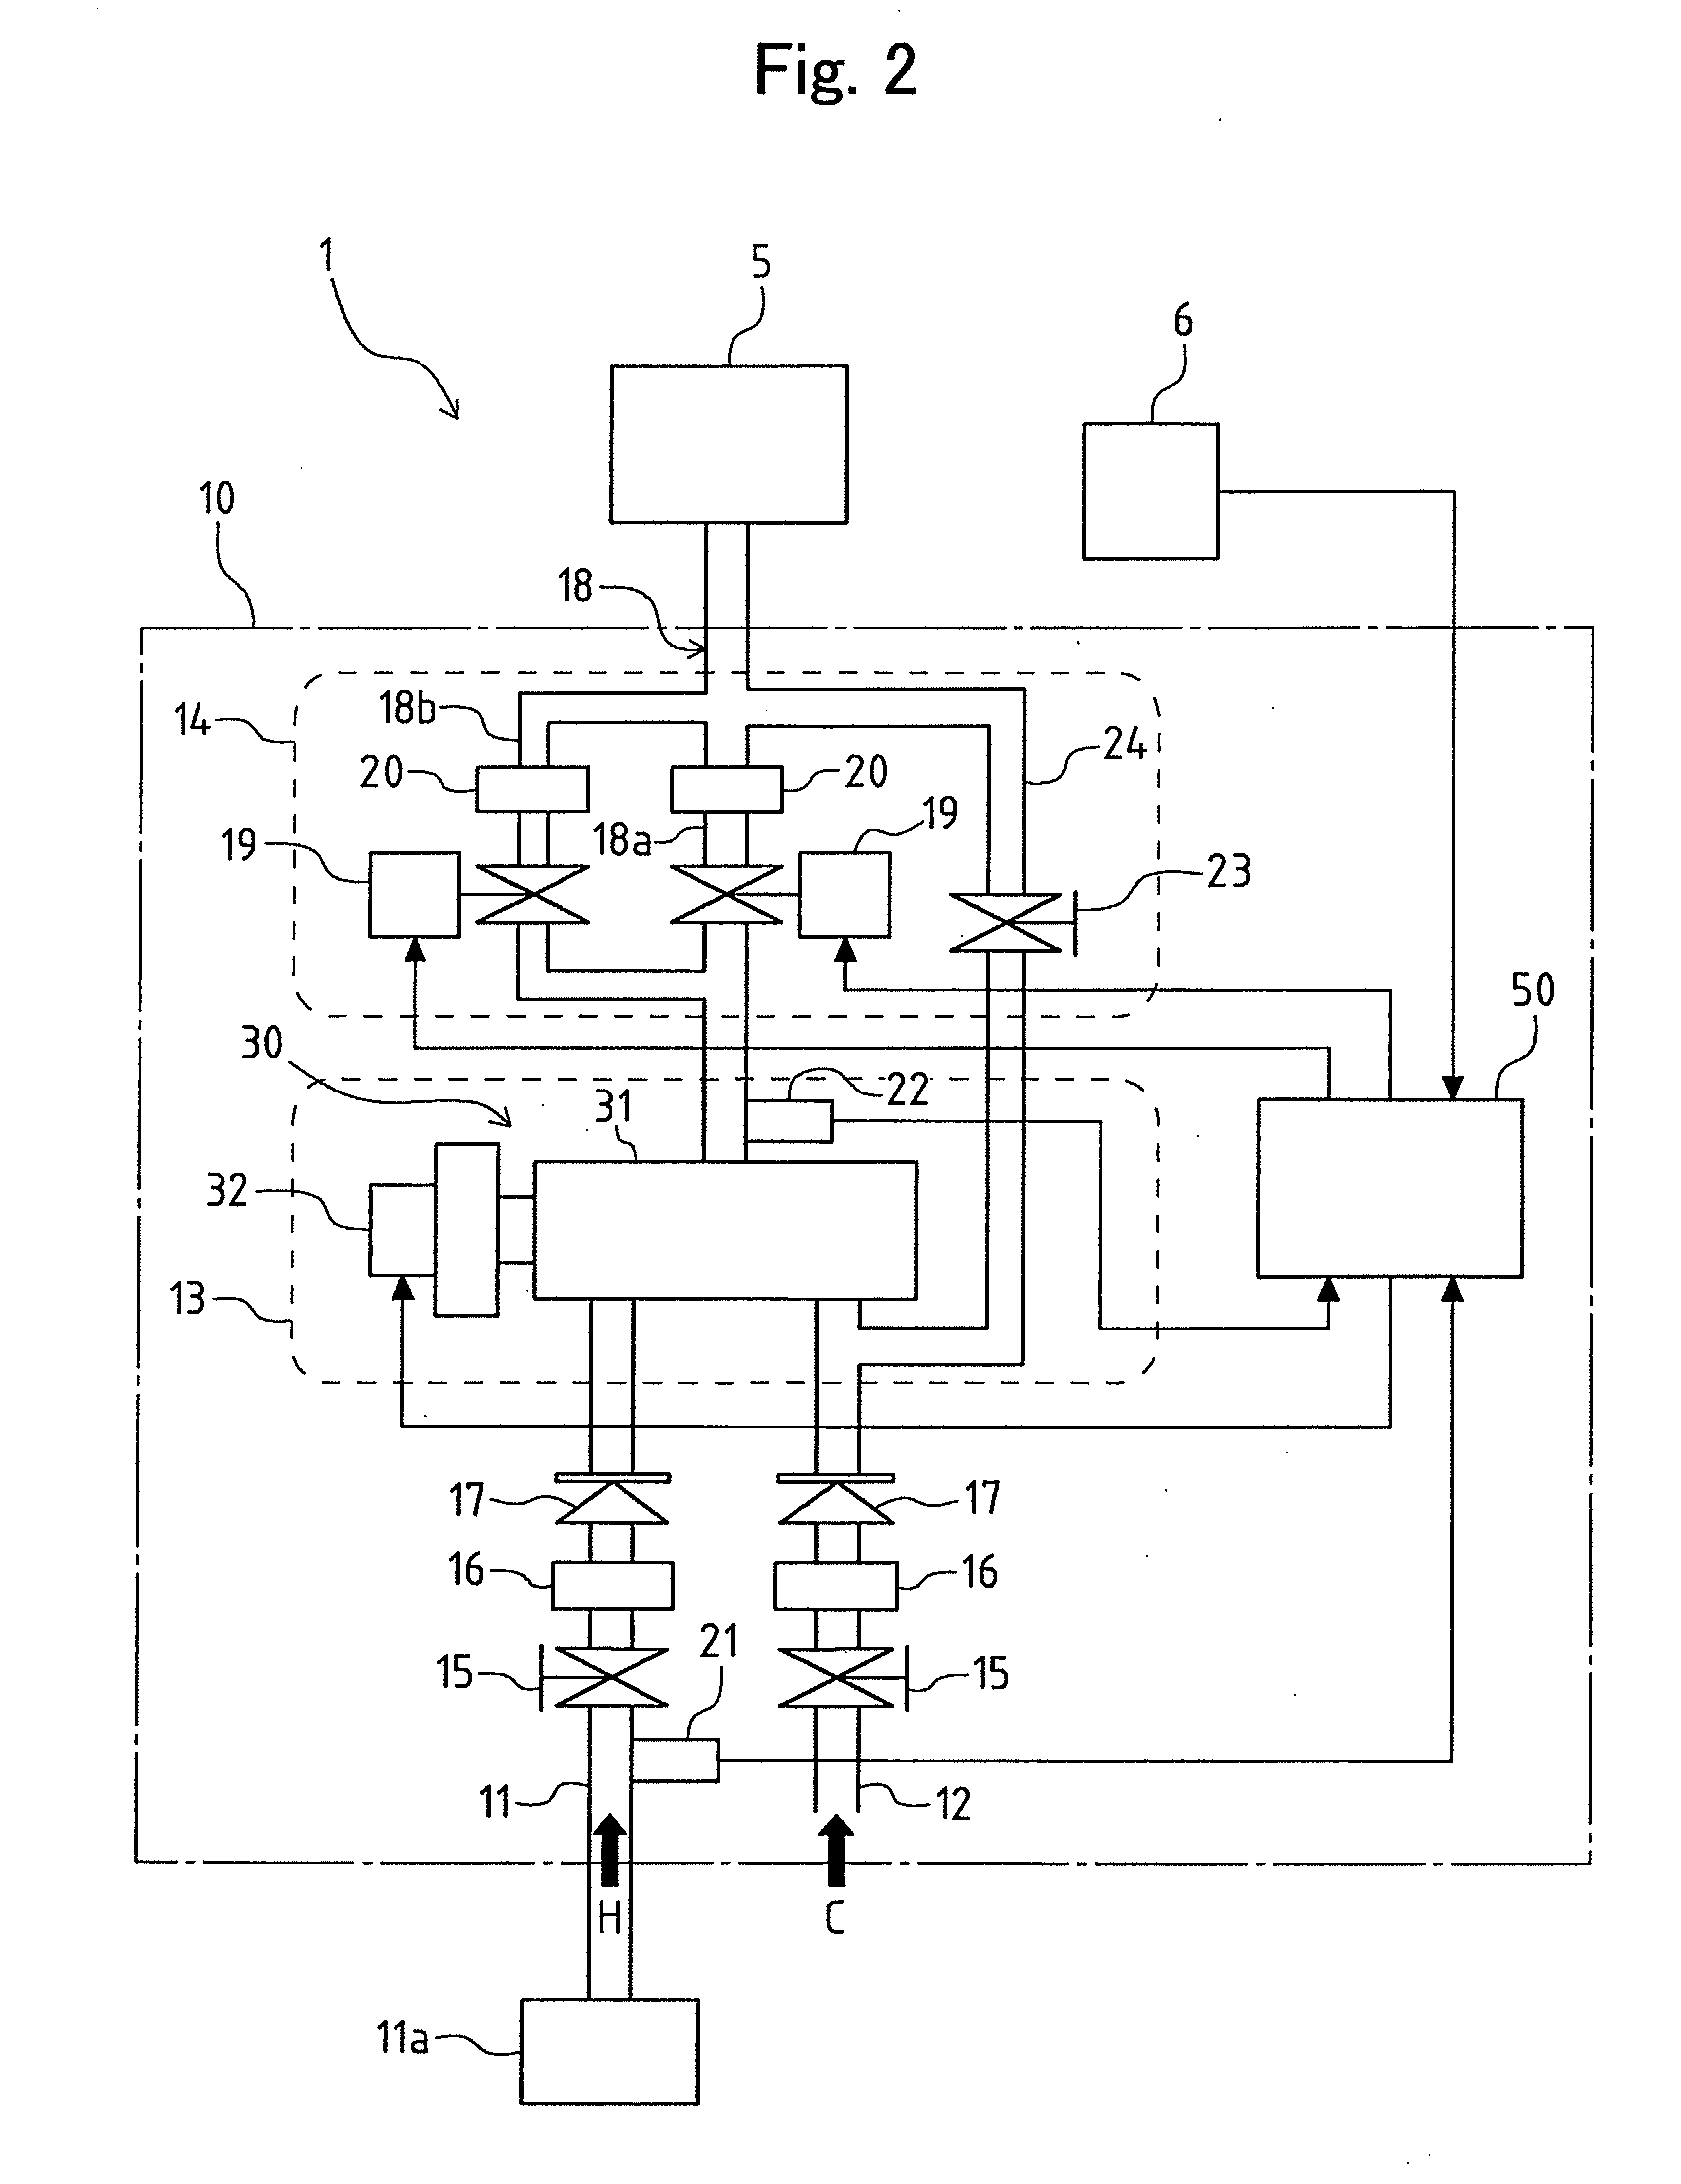 Water-and-hot-water mixing device